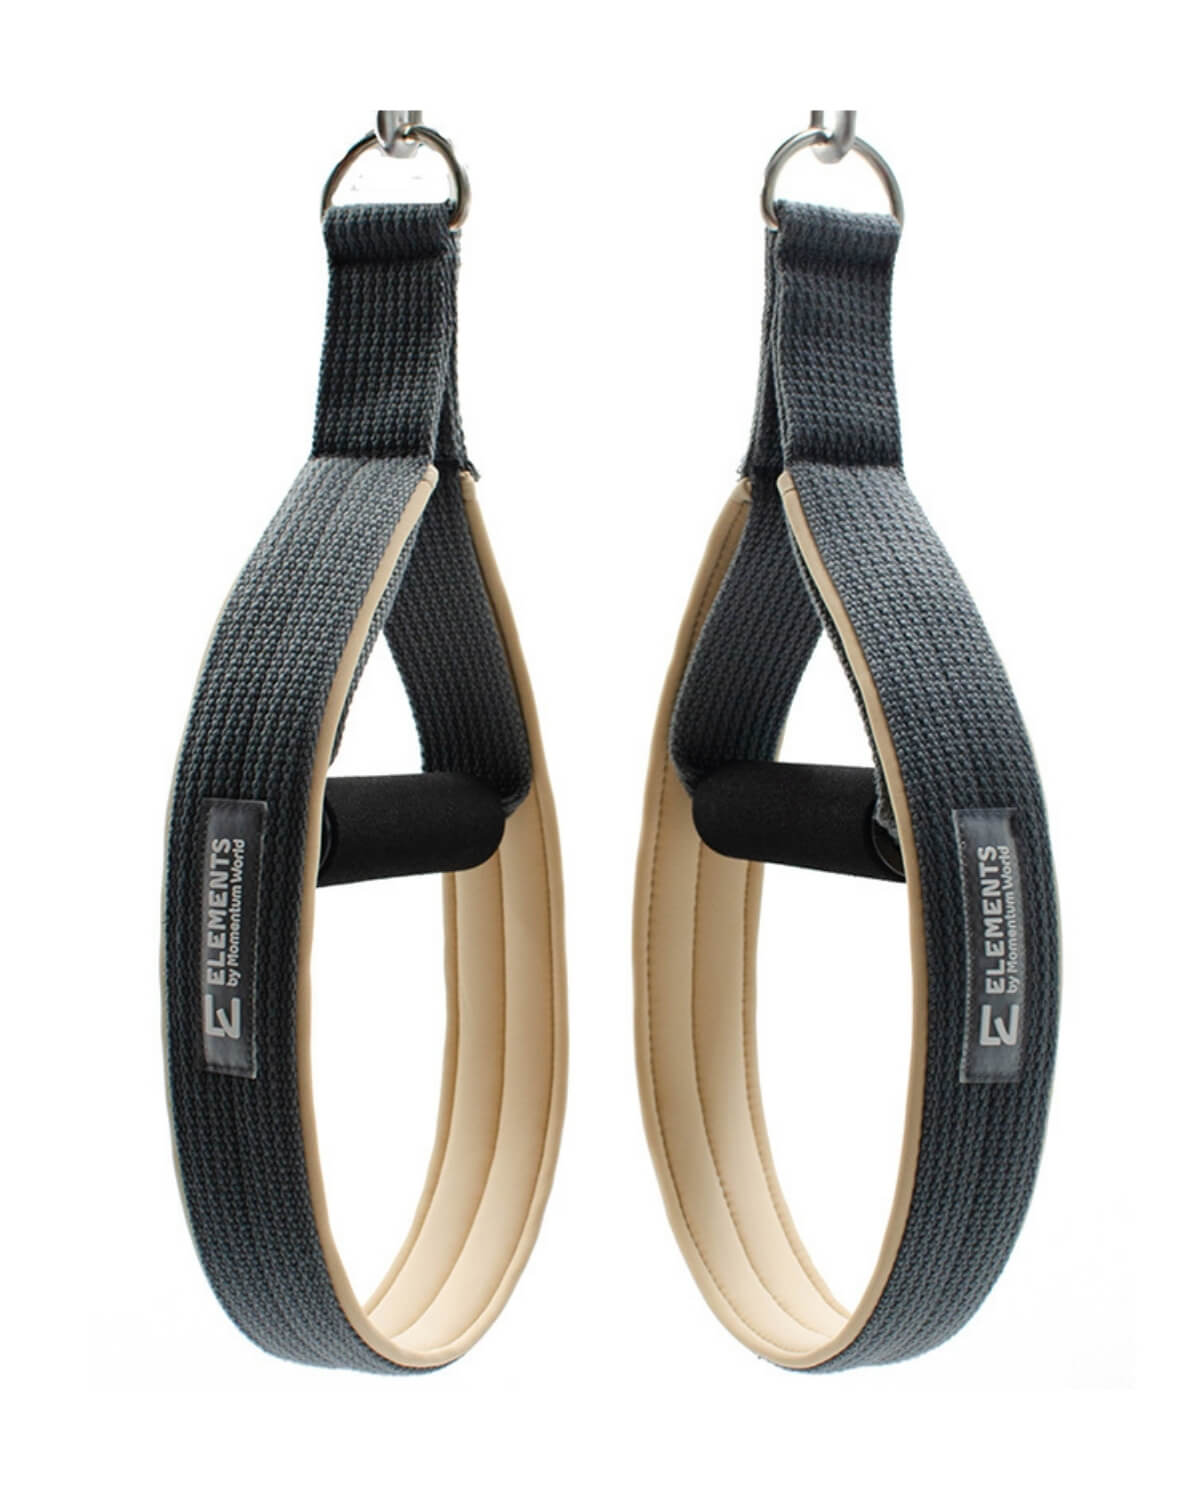 ELEMENTS Pilates straps, GYROTONIC straps, bench covers, double loops, y  loops, - WHEALTHY-LIFE